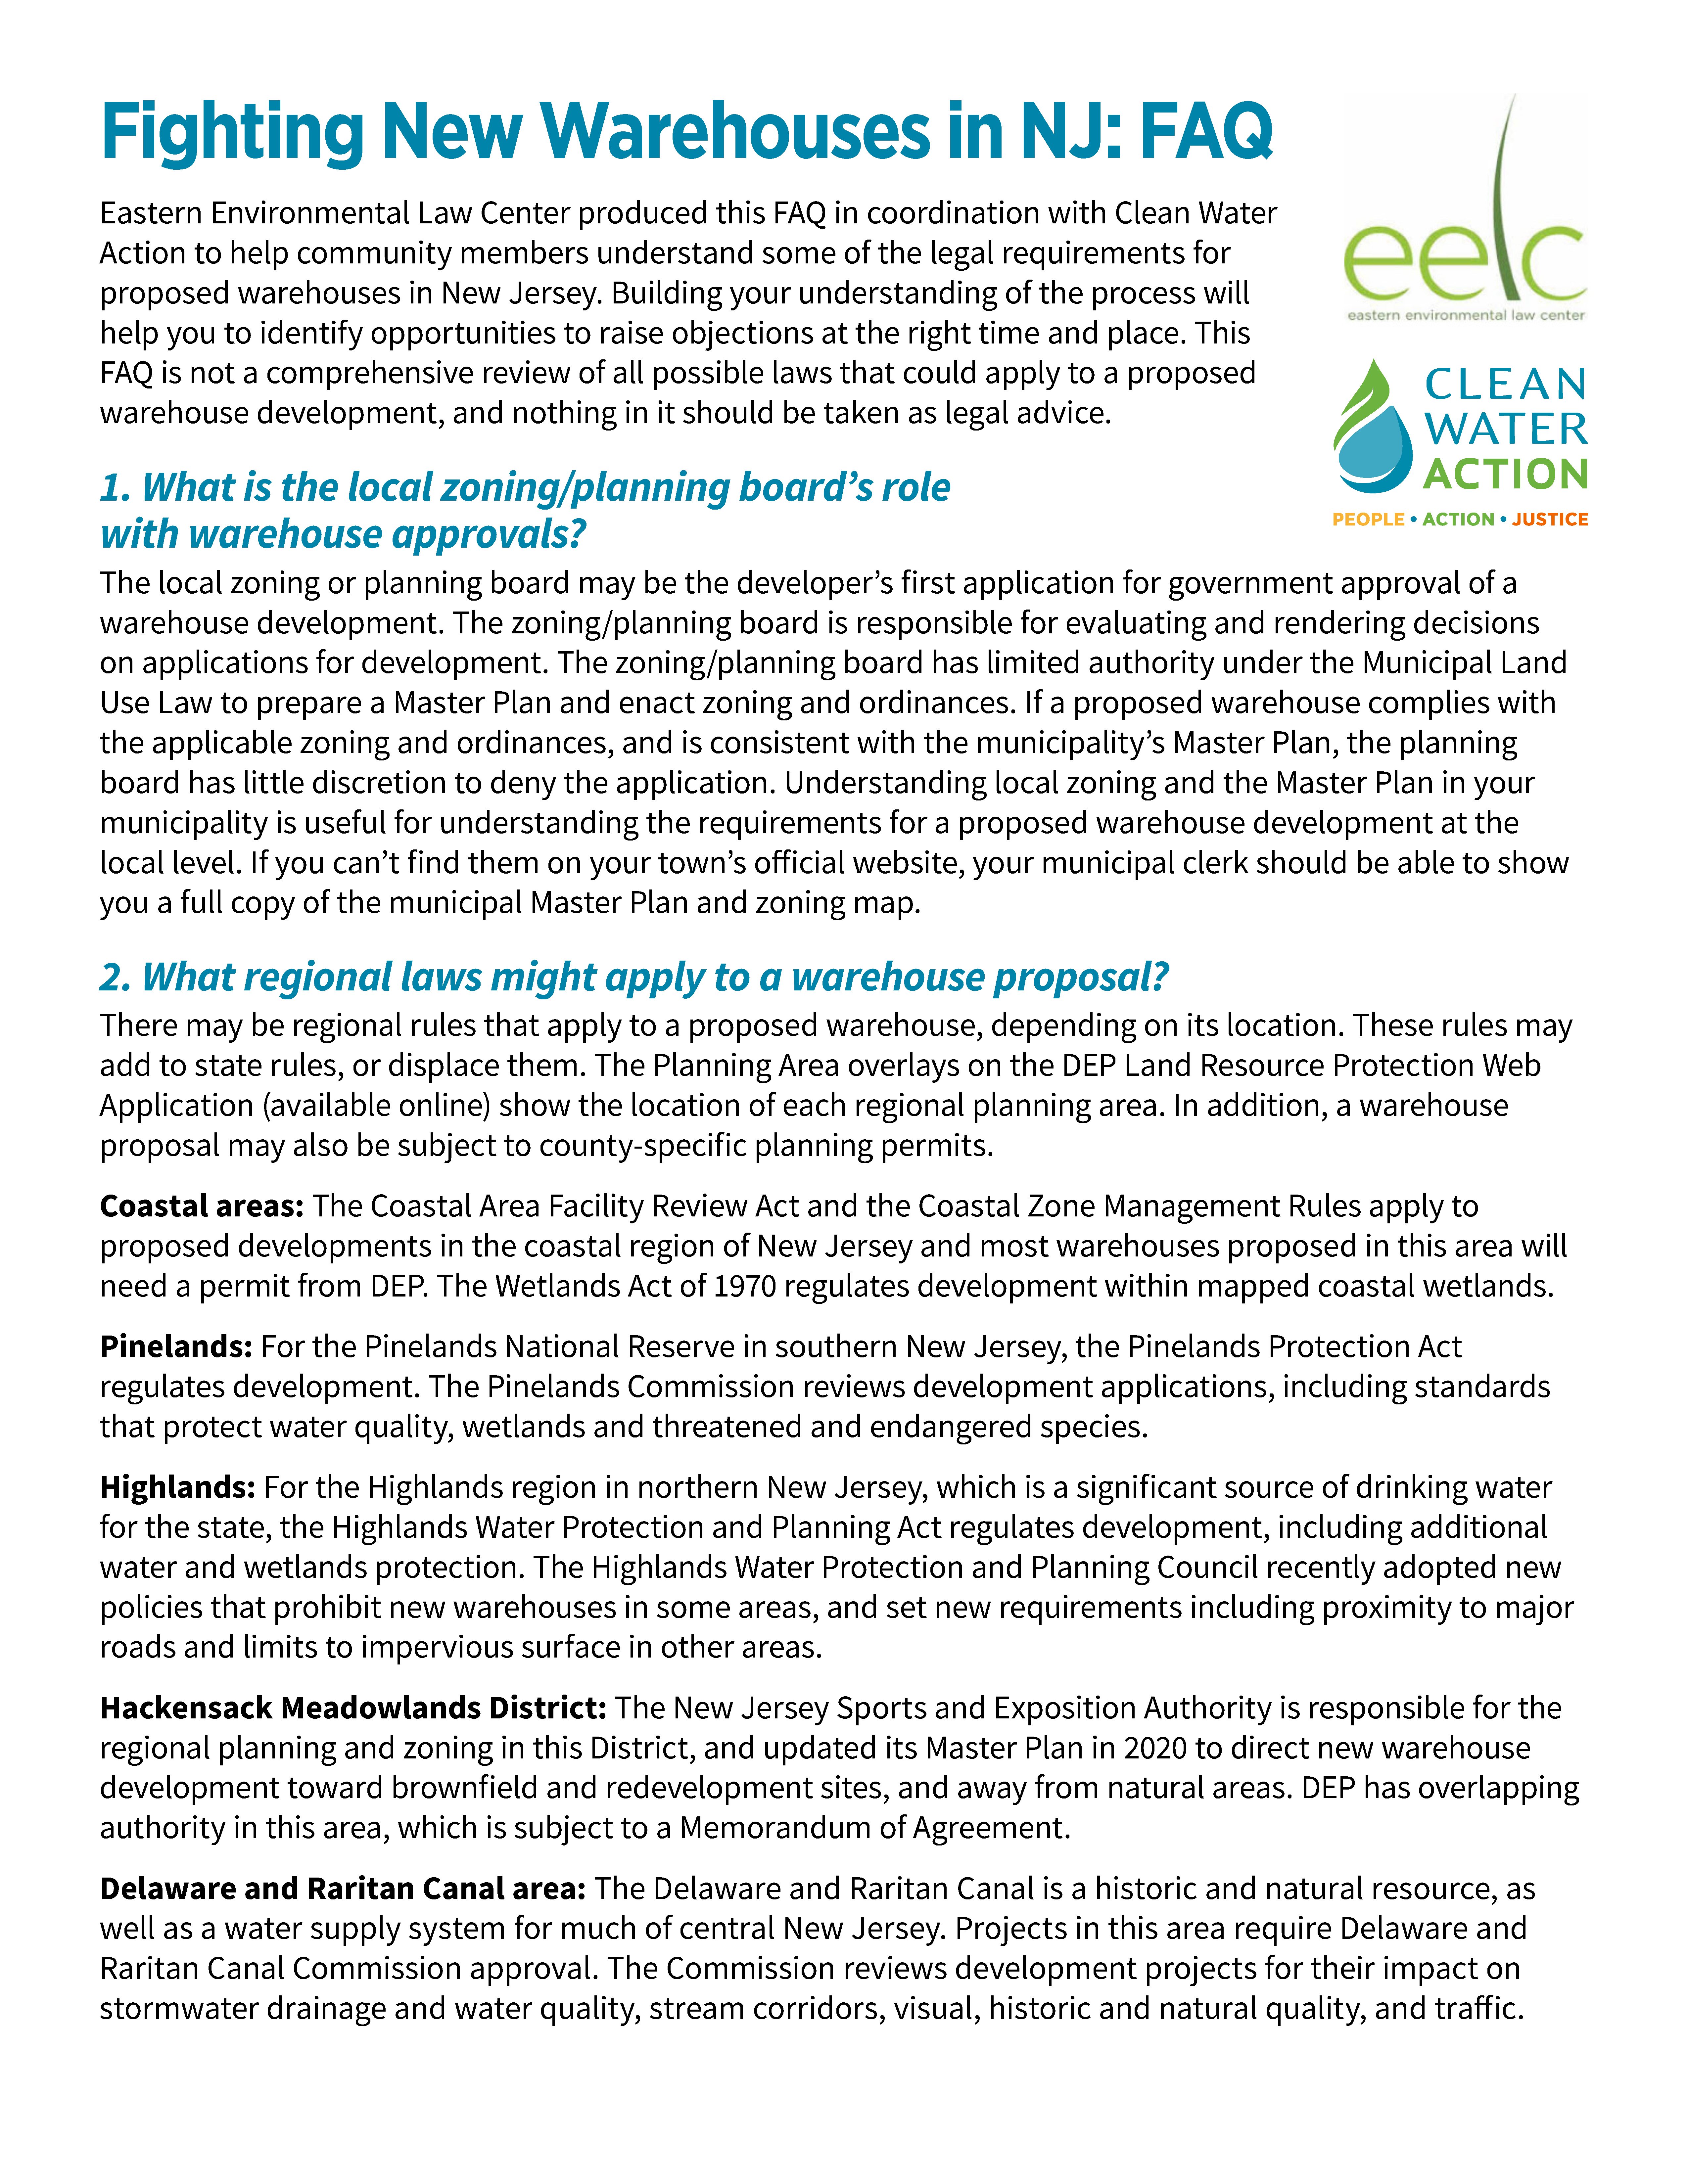 Fighting New Warehouses in NJ FAQ Fact Sheet | Page 1